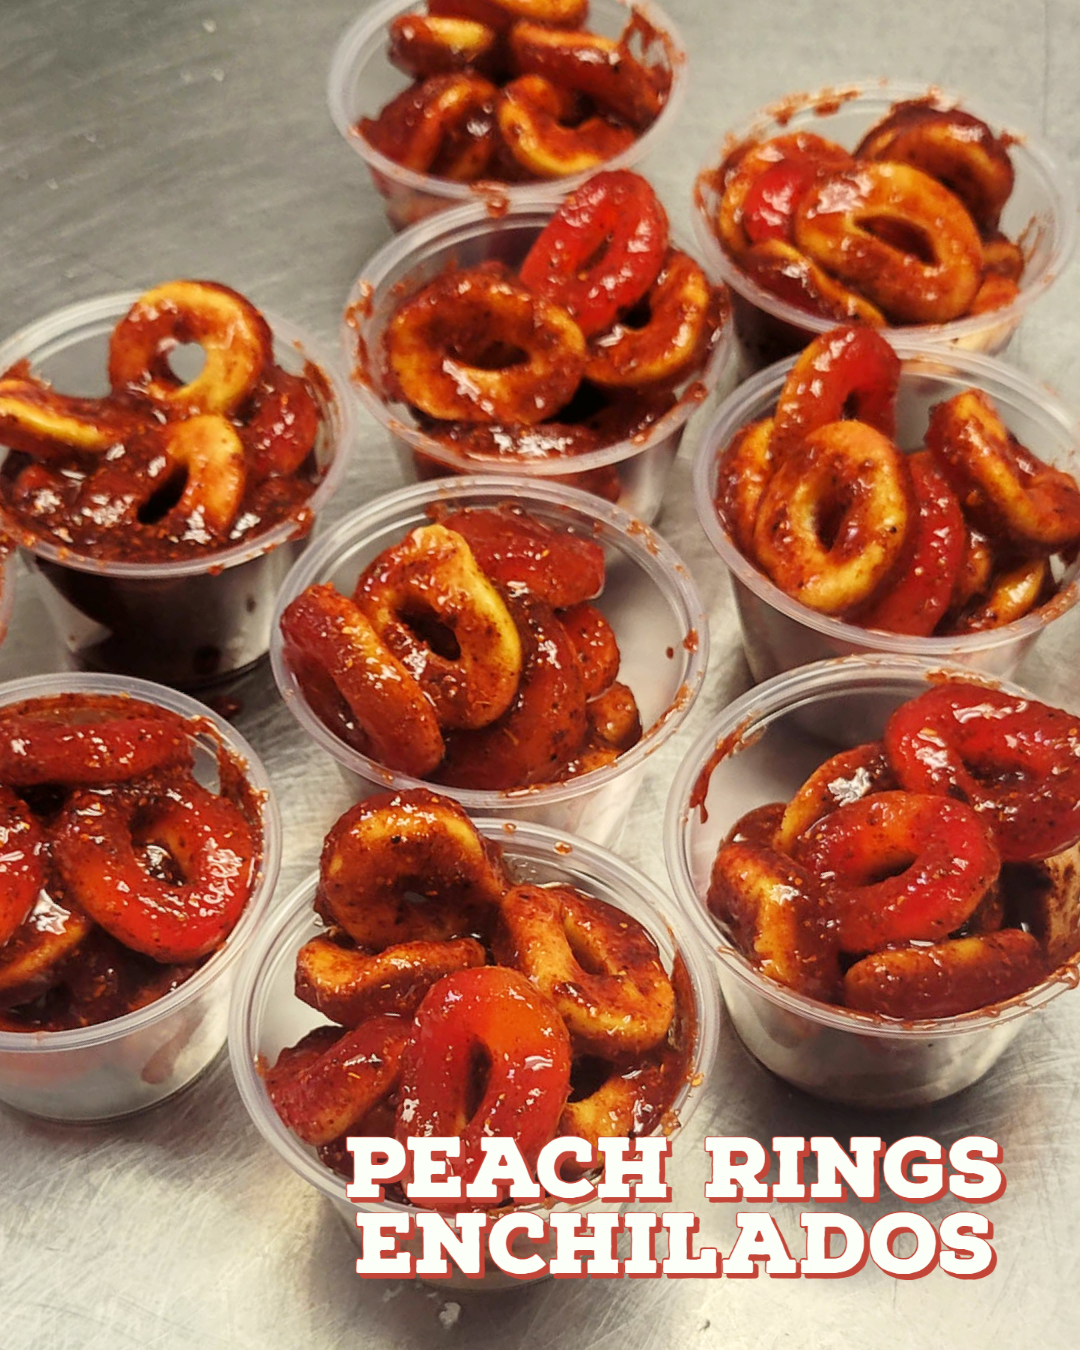 Dulces Enchilados Peach Rings 5 oz - American Candy Meets Mexican Spices - Sol Dias Mexican Treats